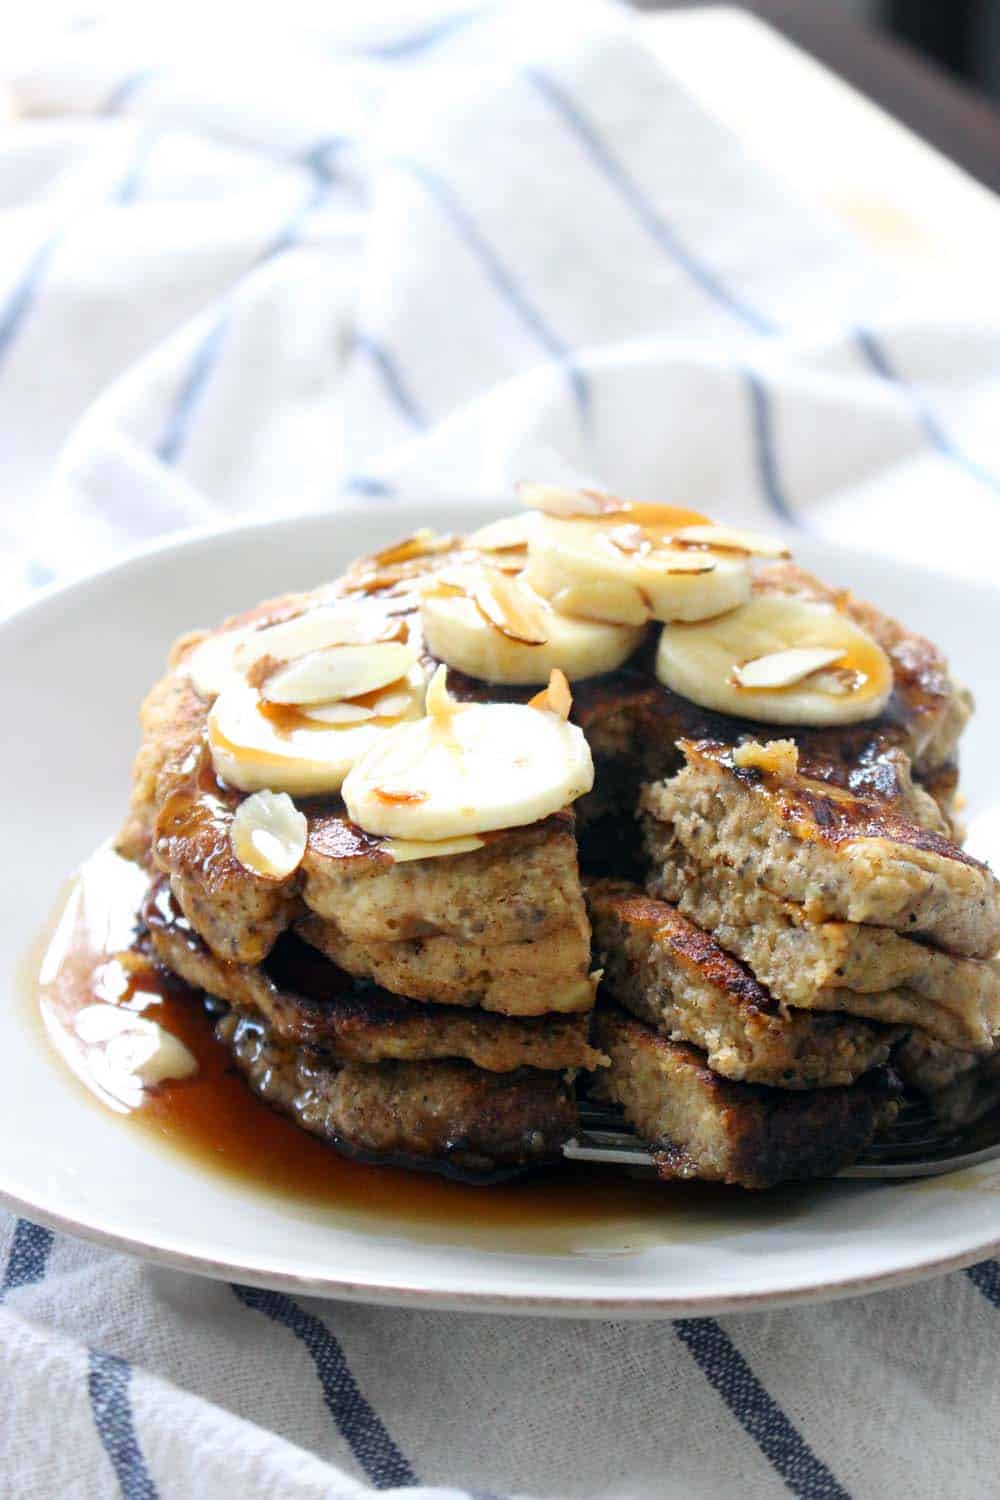 Banana Chia Seed Pancakes | Hearty, delicious, and fluffy banana pancakes with chia seeds added, made with whole wheat flour and sweetened with honey. A healthy, energy boosting breakfast!